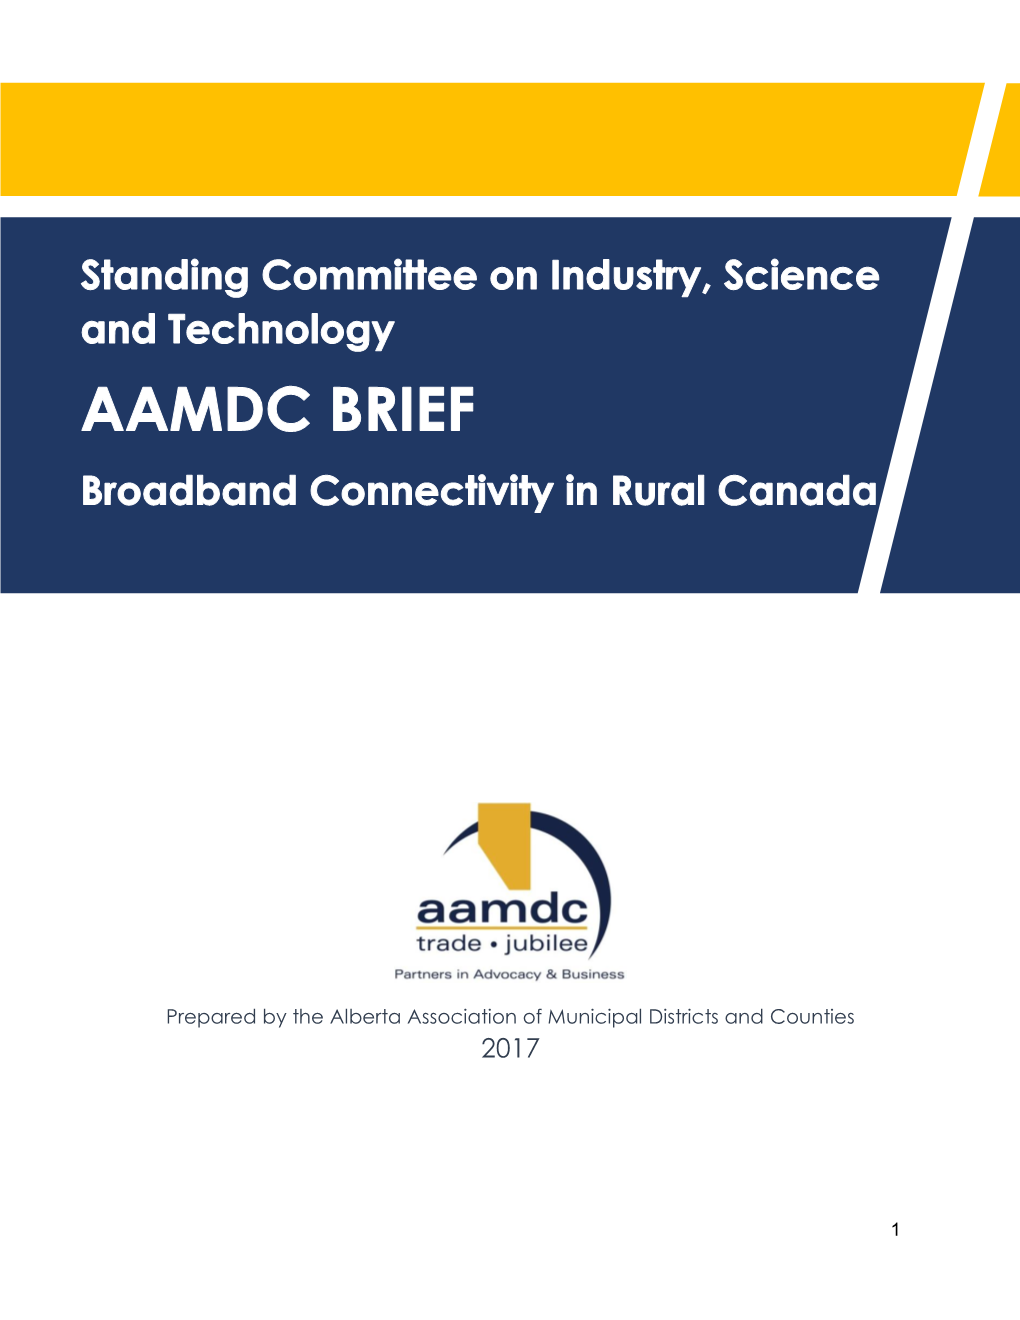 Prepared by the Alberta Association of Municipal Districts and Counties 2017